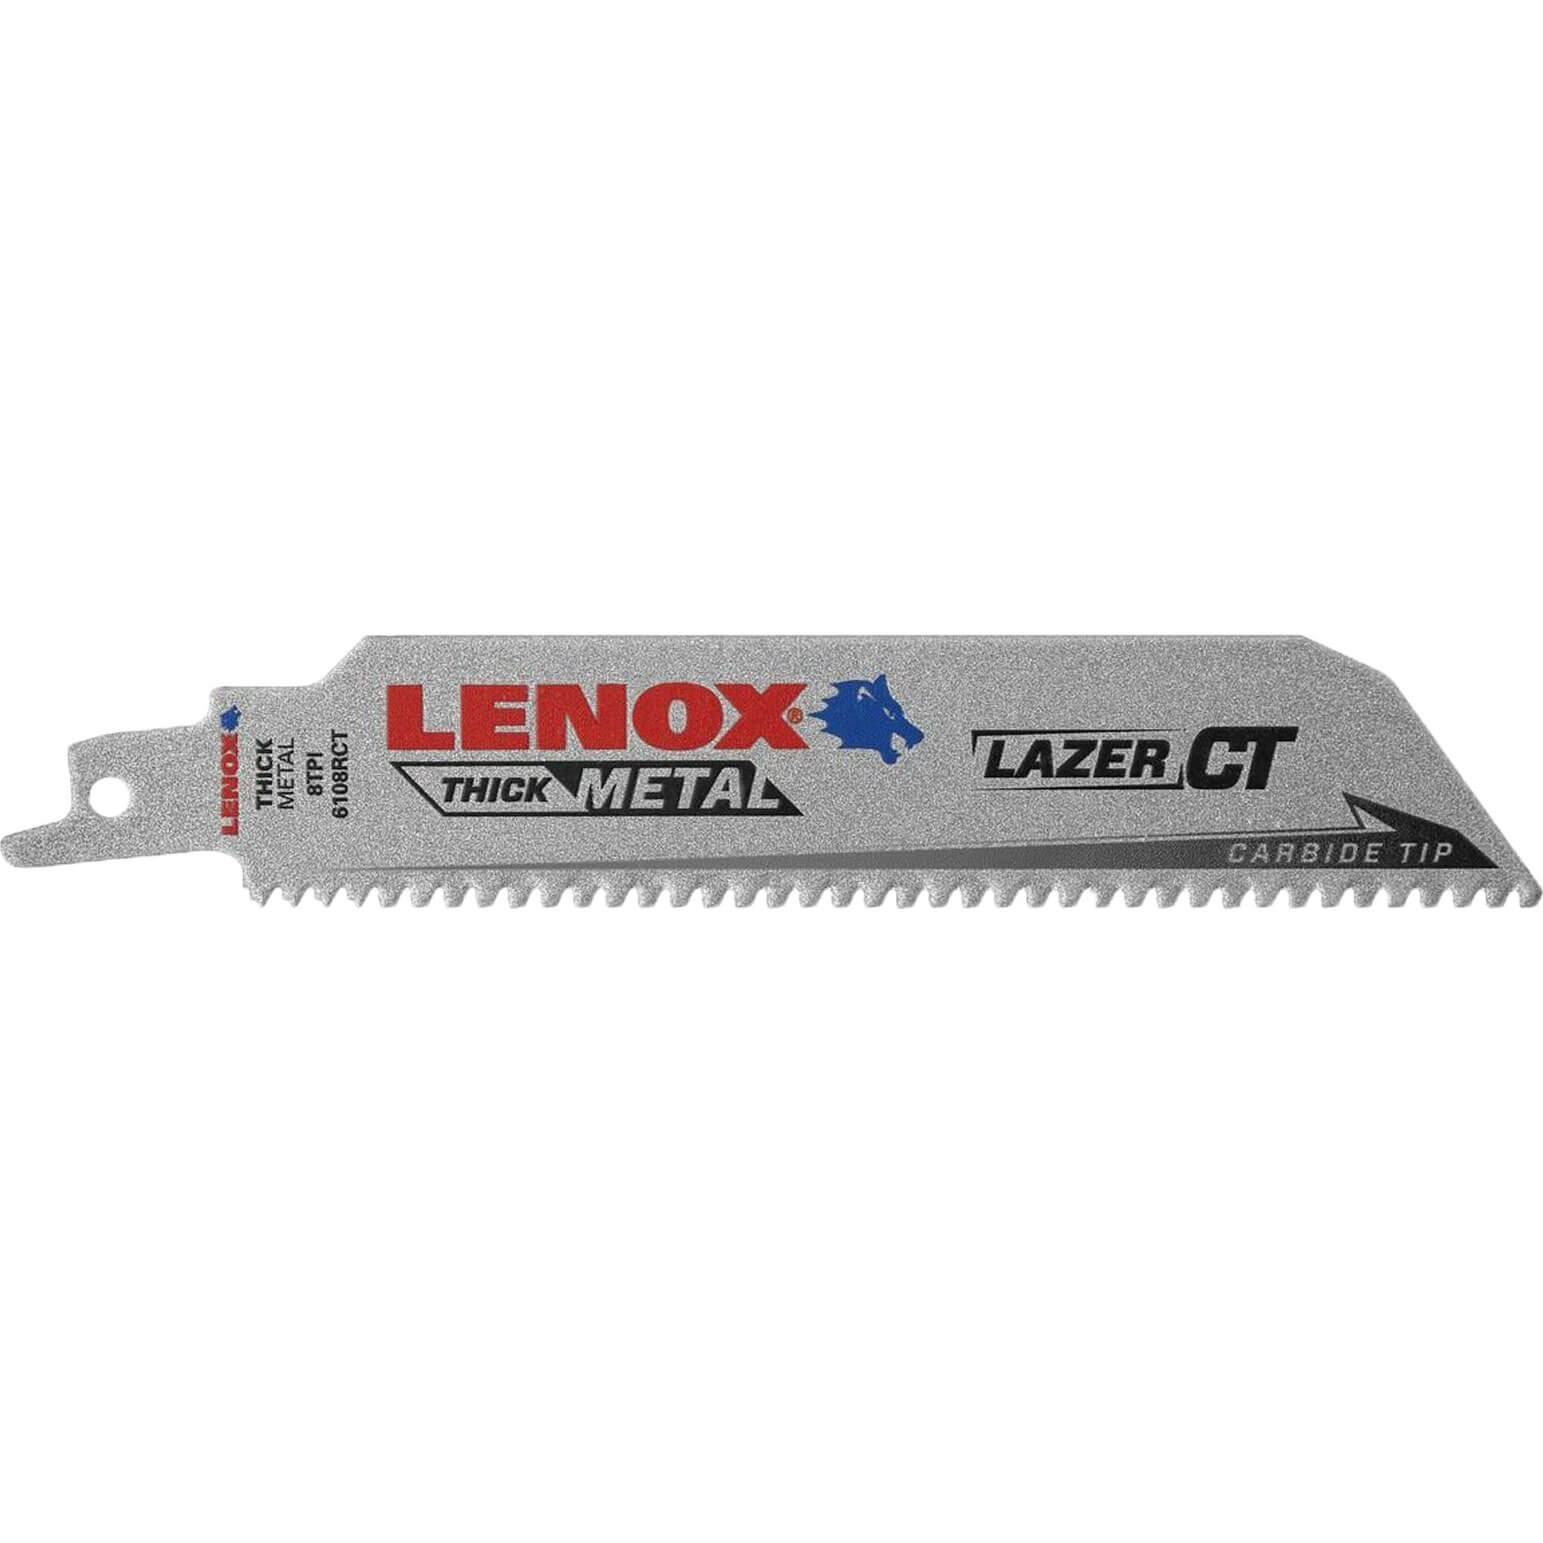 Photo of Lenox Lazer Ct Carbide Tipped Reciprocating Saw Blades 230mm Pack Of 1